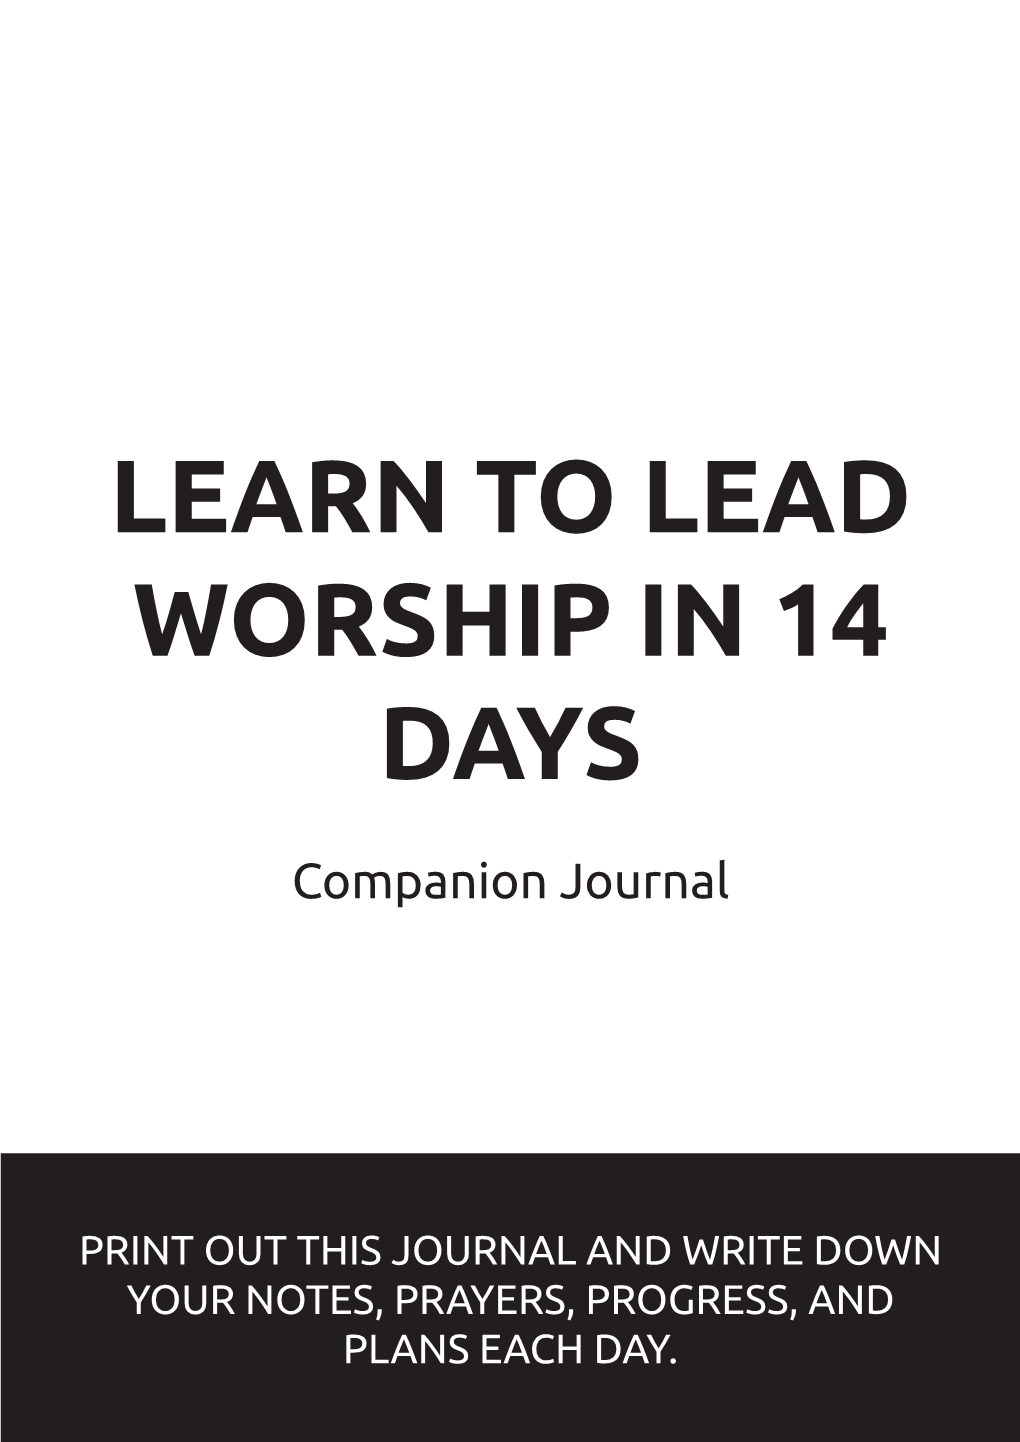 Learn to Lead Worship in 14 Days